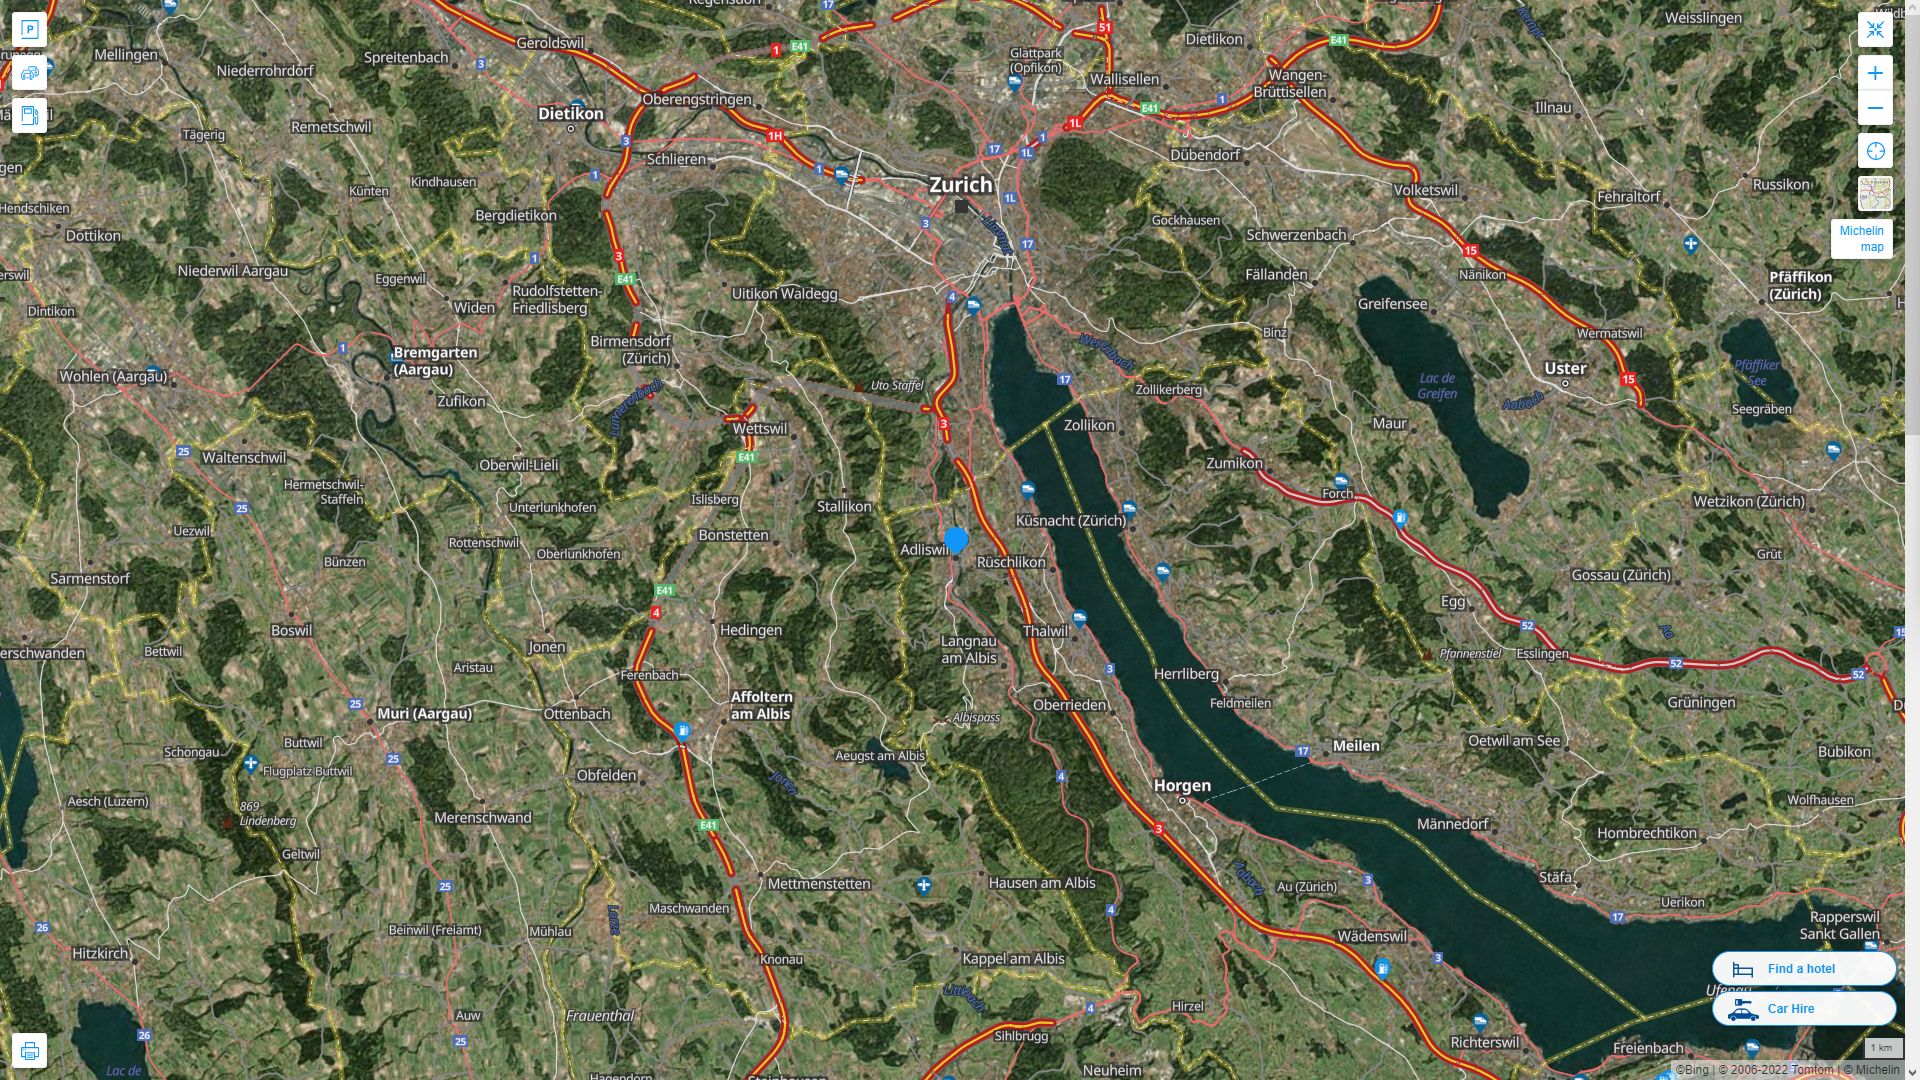 Adliswil Highway and Road Map with Satellite View